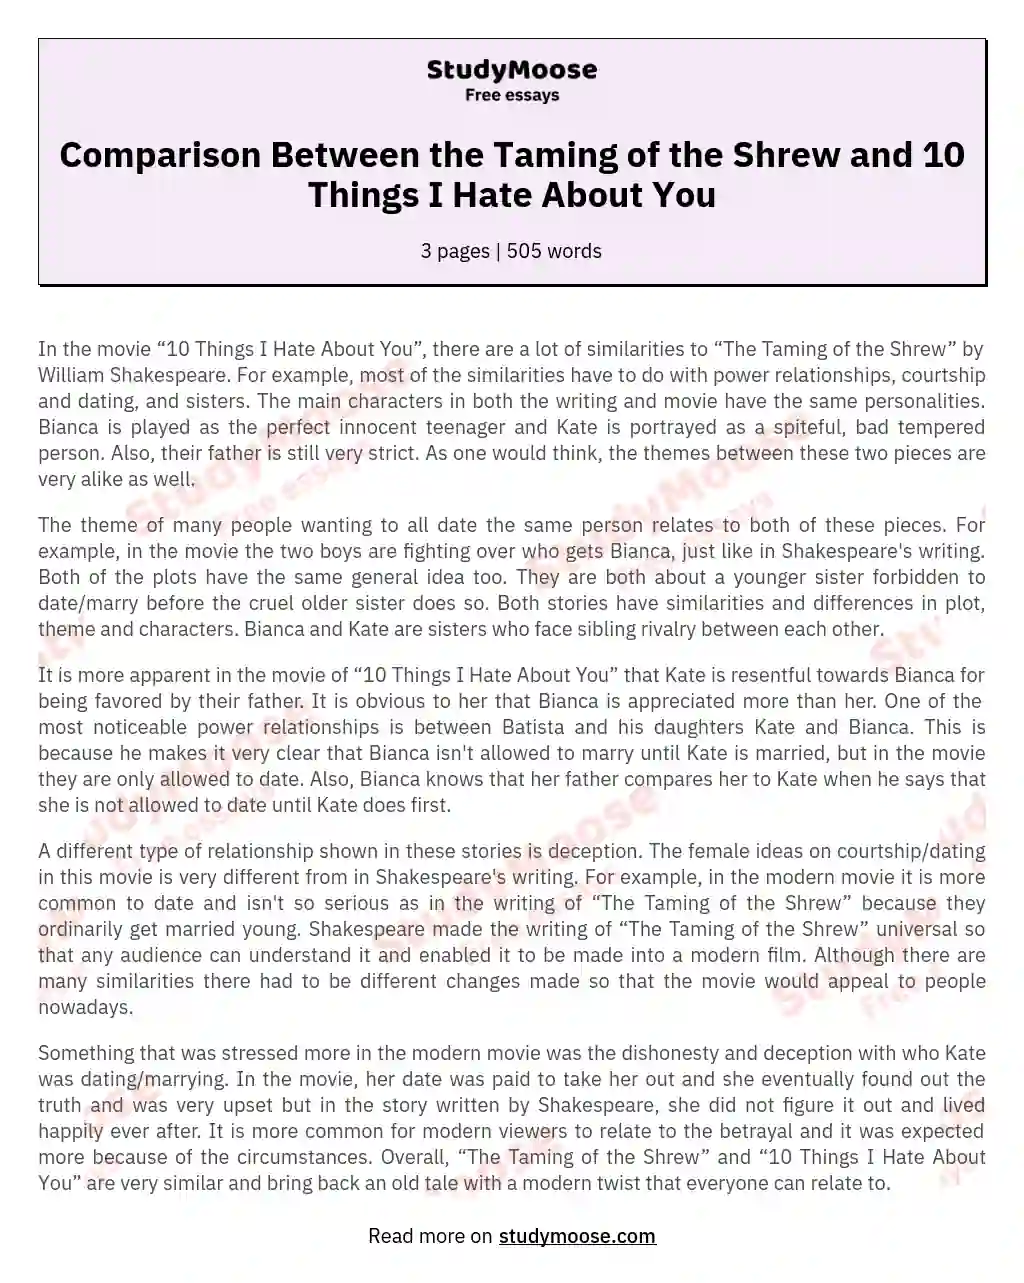 Comparison Between the Taming of the Shrew and 10 Things I Hate About You essay